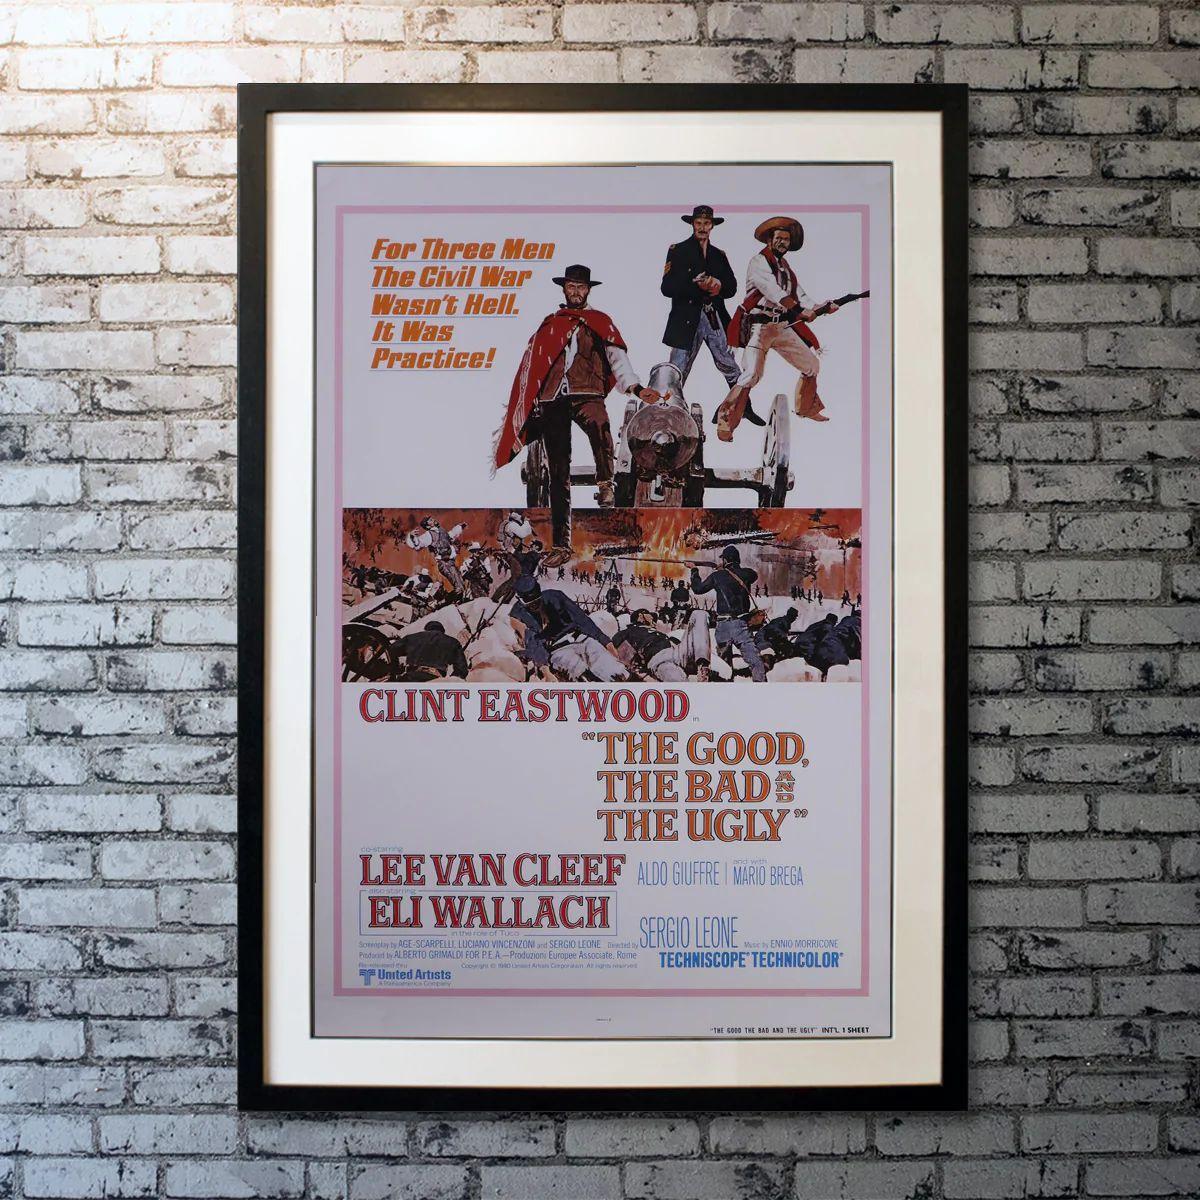 The Good, The Bad and The Ugly, Unframed Poster, 1980r

A bounty hunting scam joins two men in an uneasy alliance against a third in a race to find a fortune in gold buried in a remote cemetery.

Year: 1980
Nationality: United States
Condition: